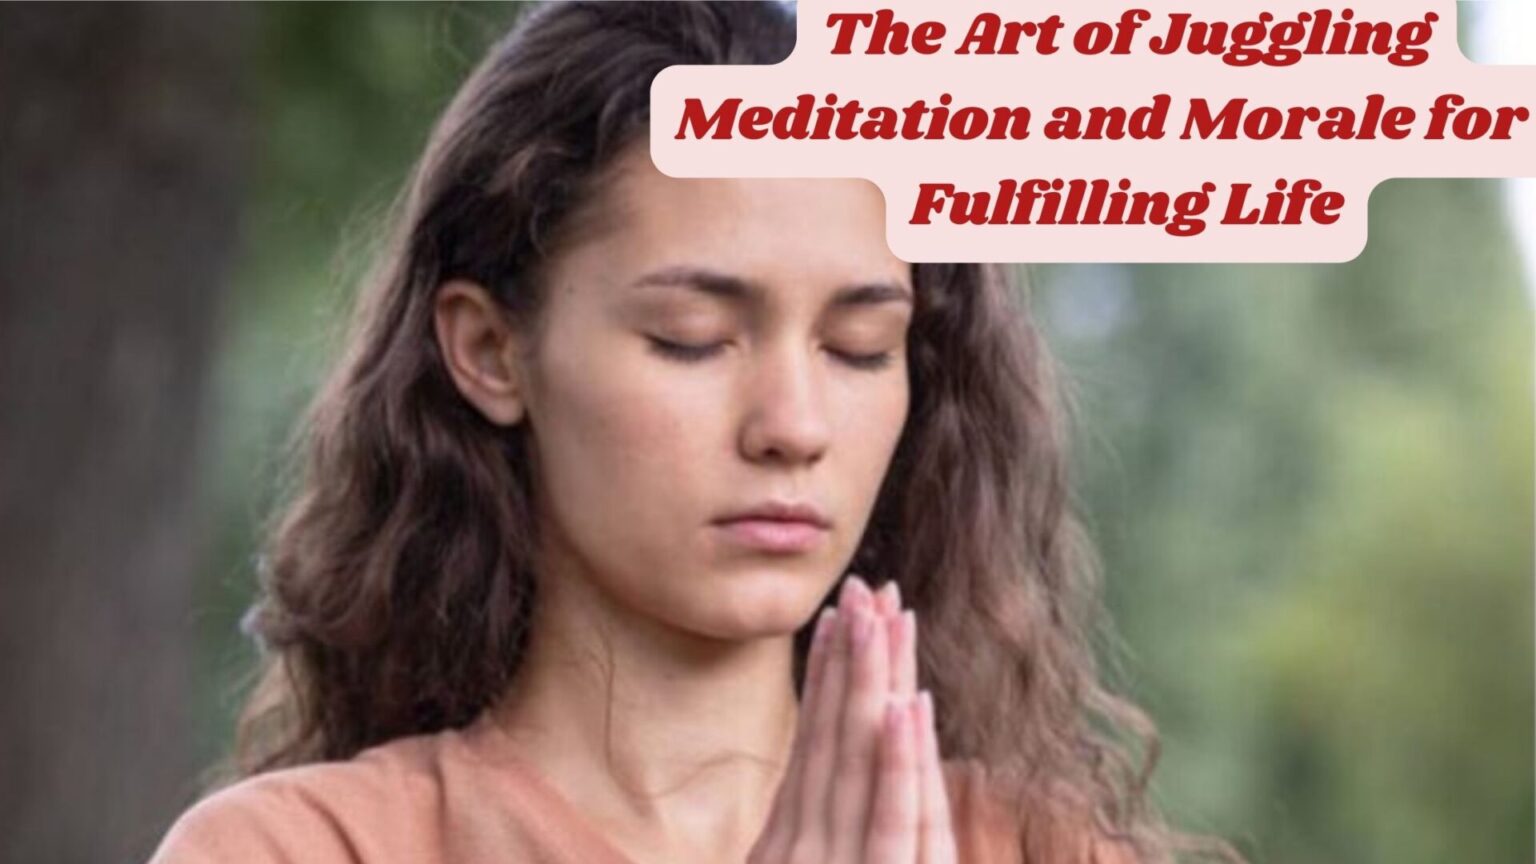 The Art of Juggling Meditation and Morale for a Fulfilling Life